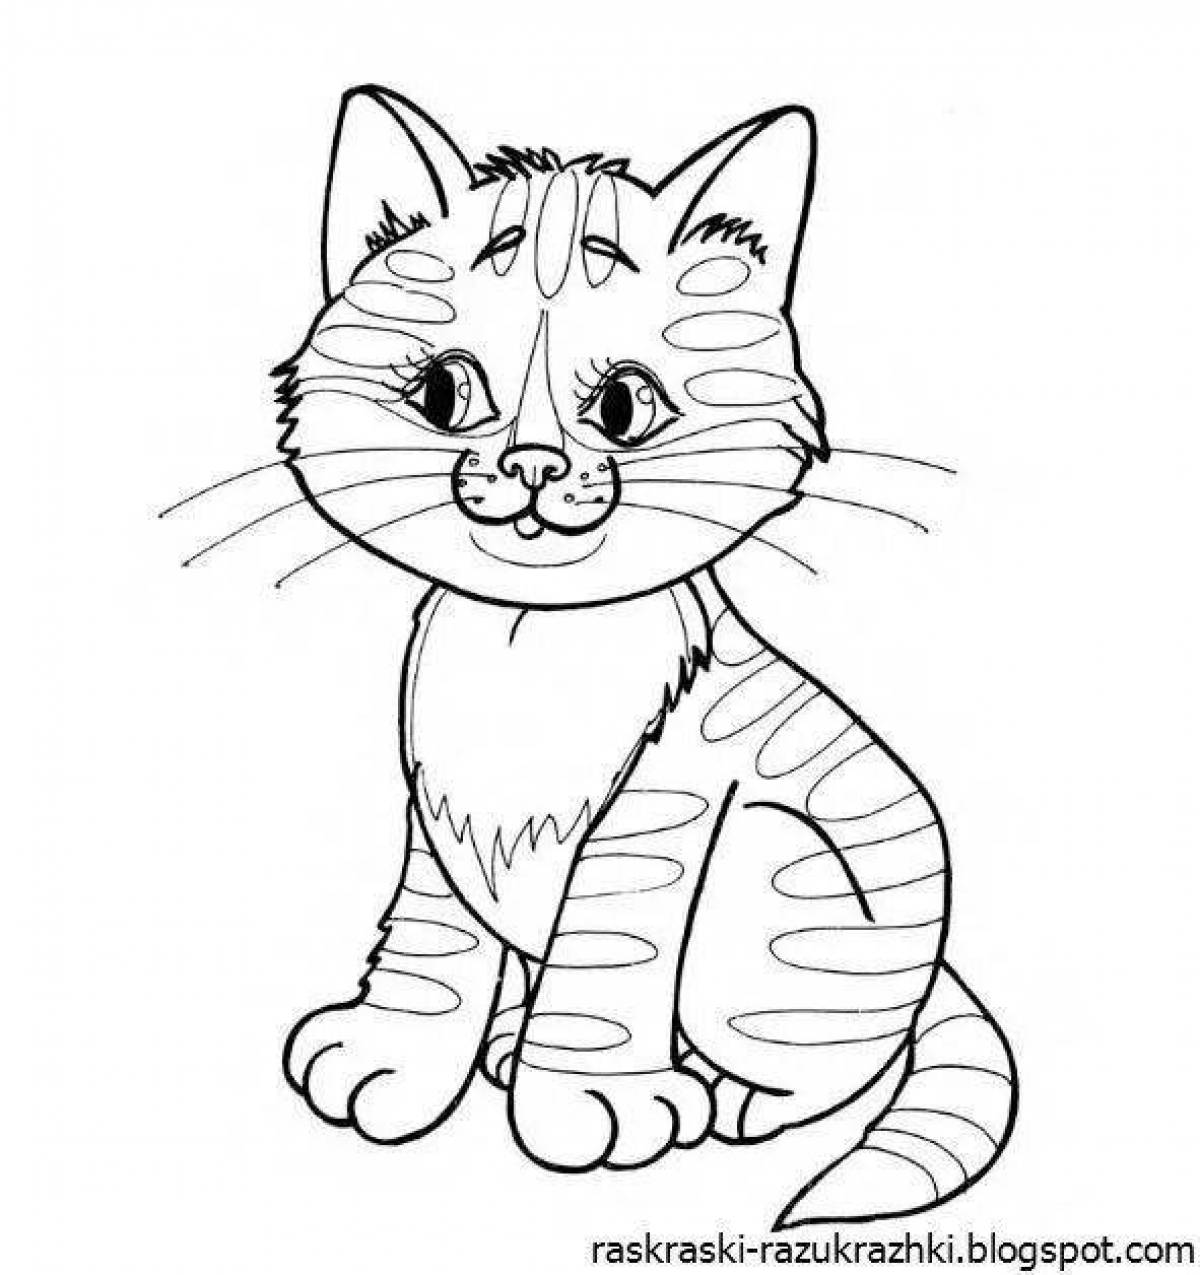 Snuggly coloring page cat for 4-5 year olds